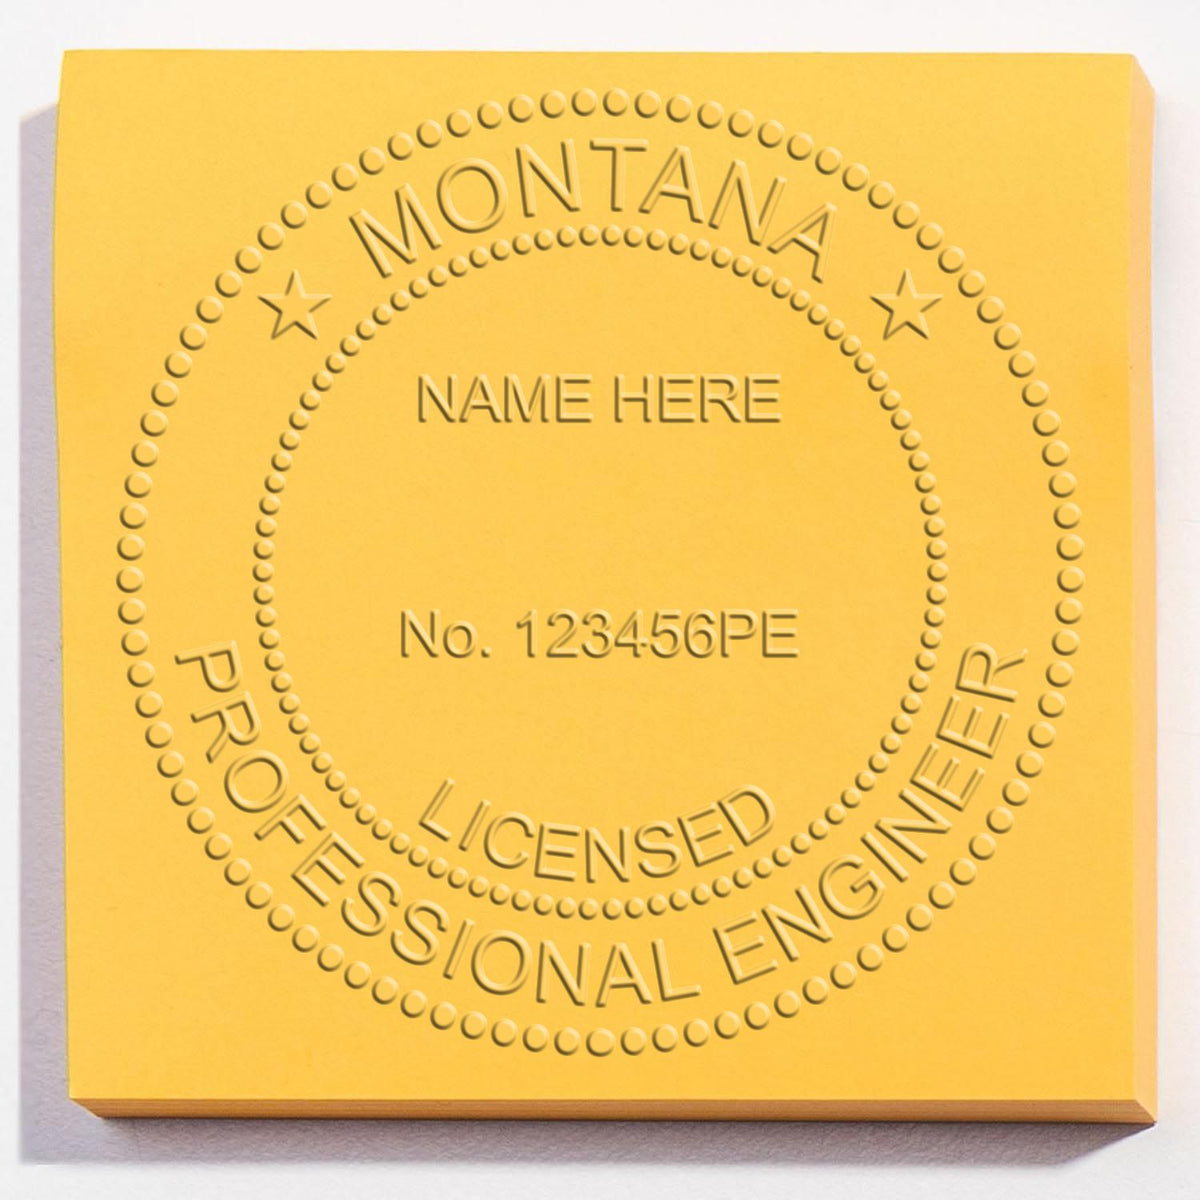 The State of Montana Extended Long Reach Engineer Seal stamp impression comes to life with a crisp, detailed photo on paper - showcasing true professional quality.